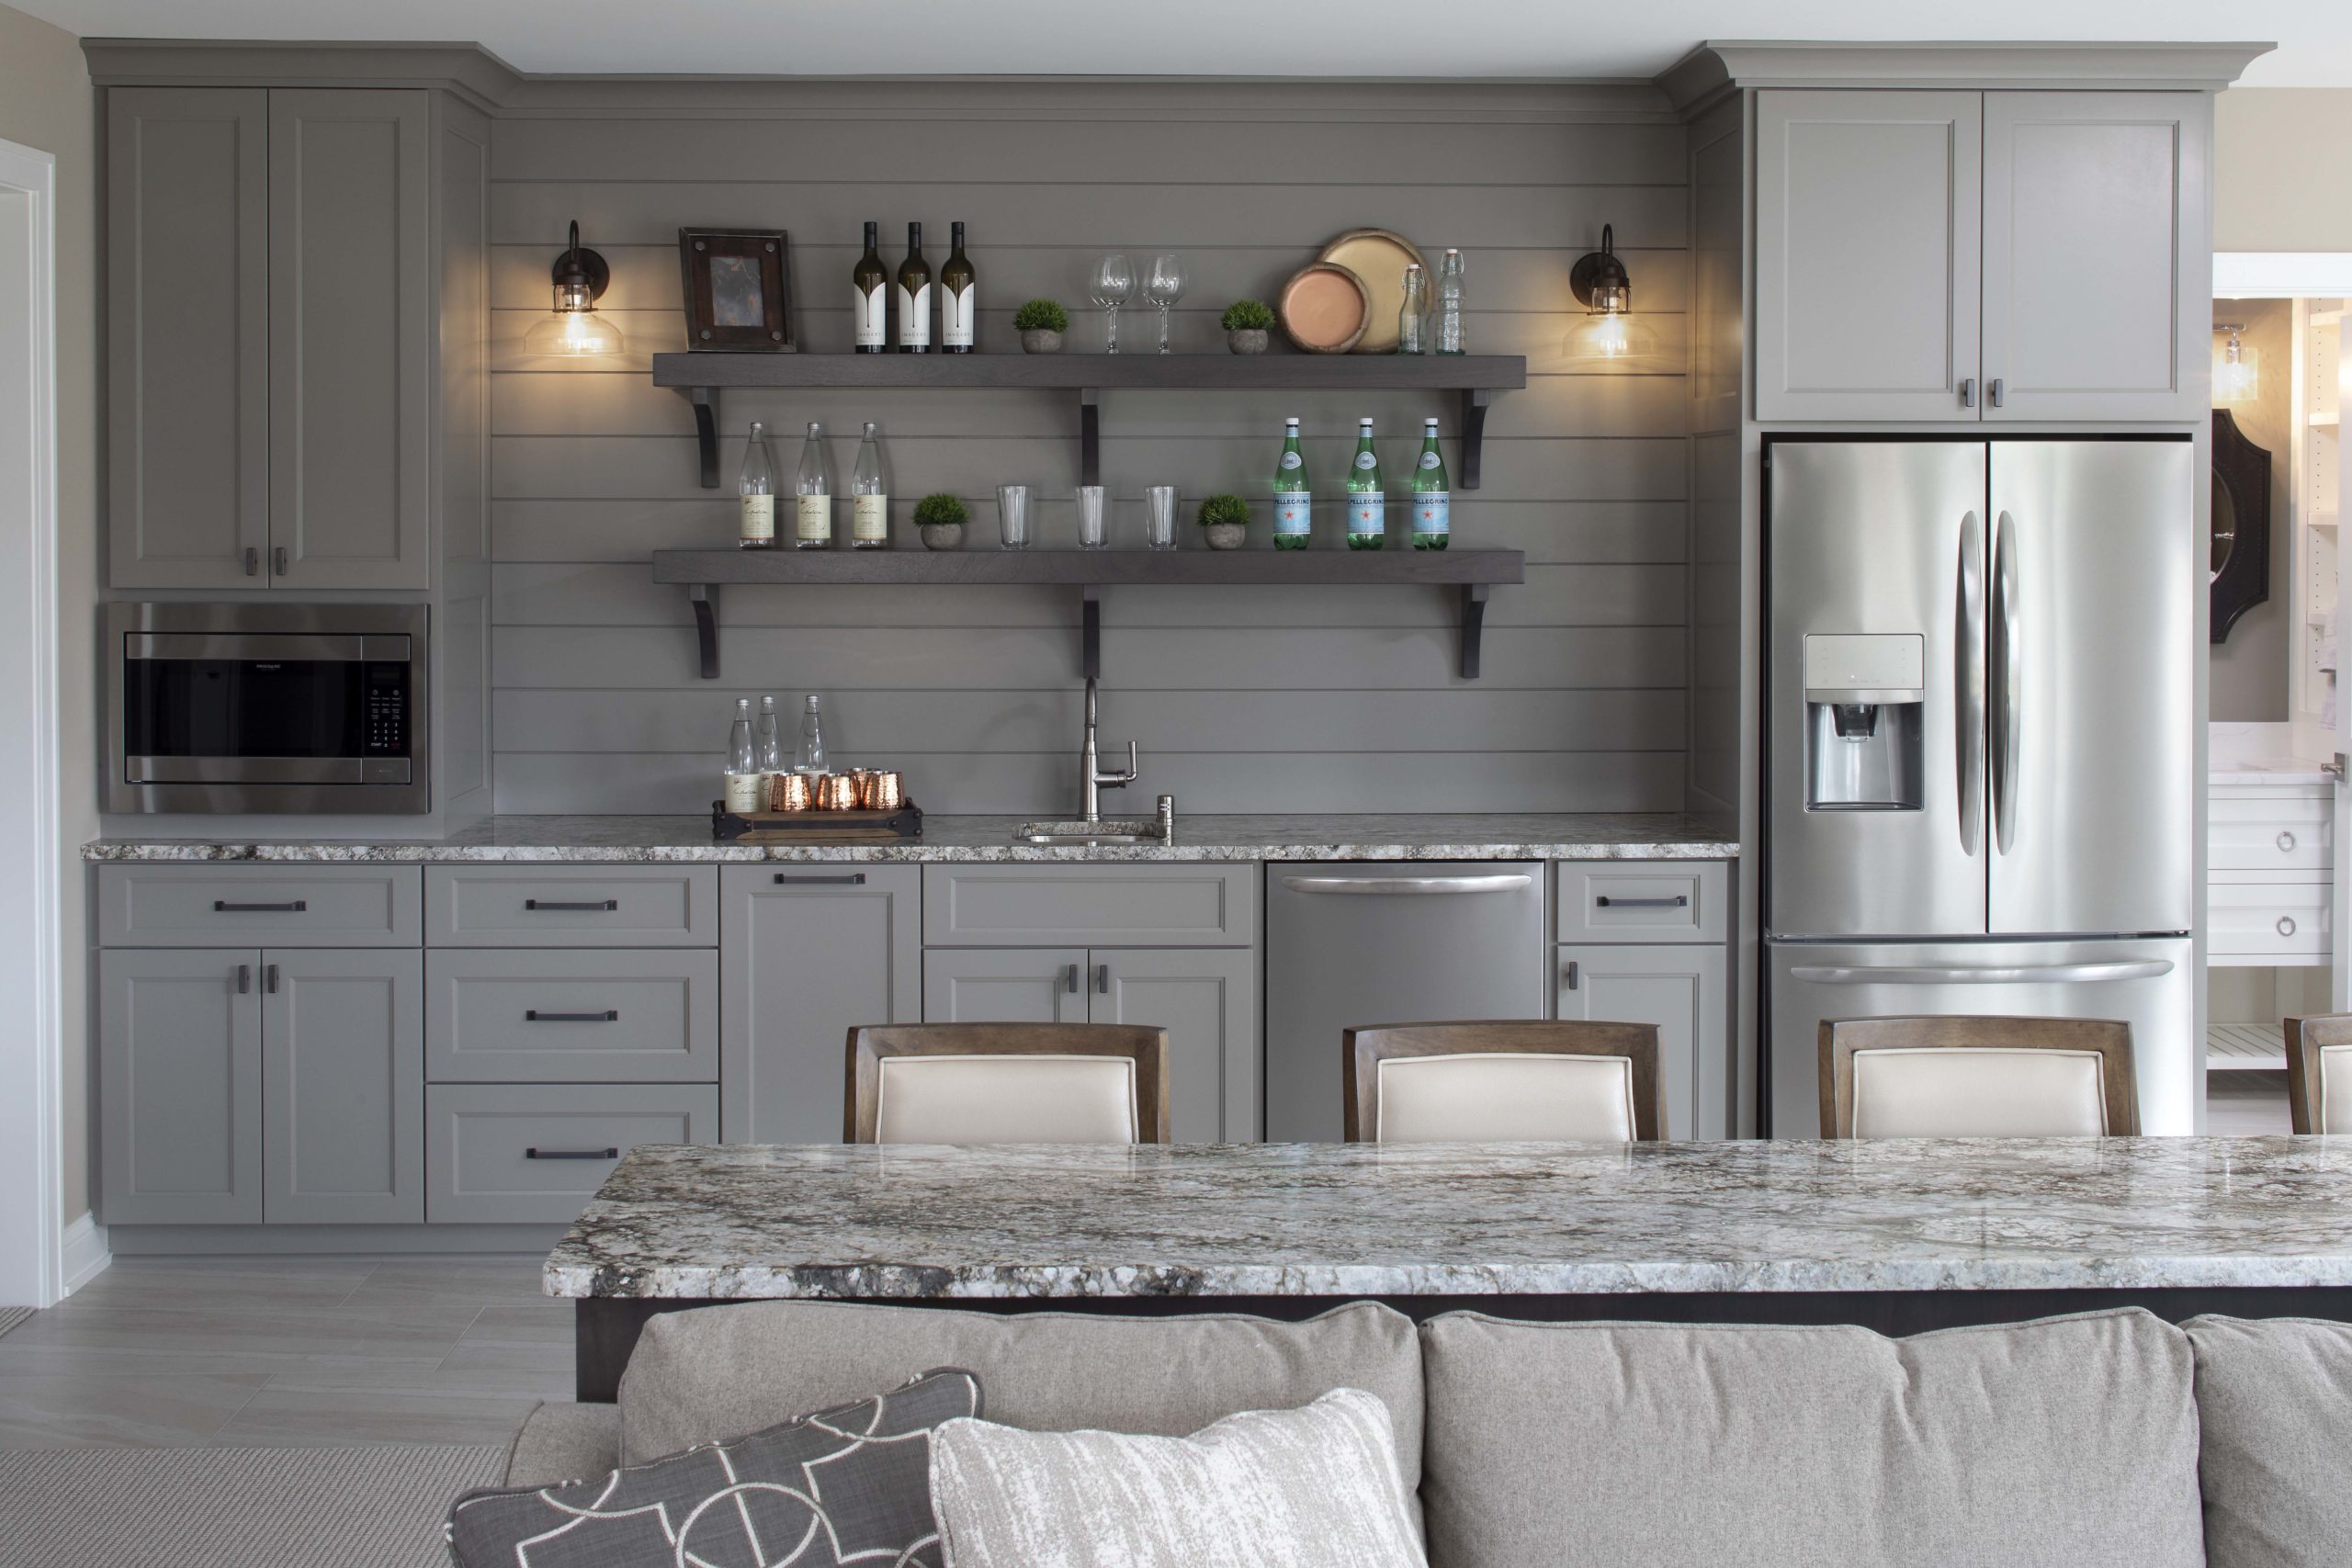 A kitchen with gray cabinets and stainless steel appliances.